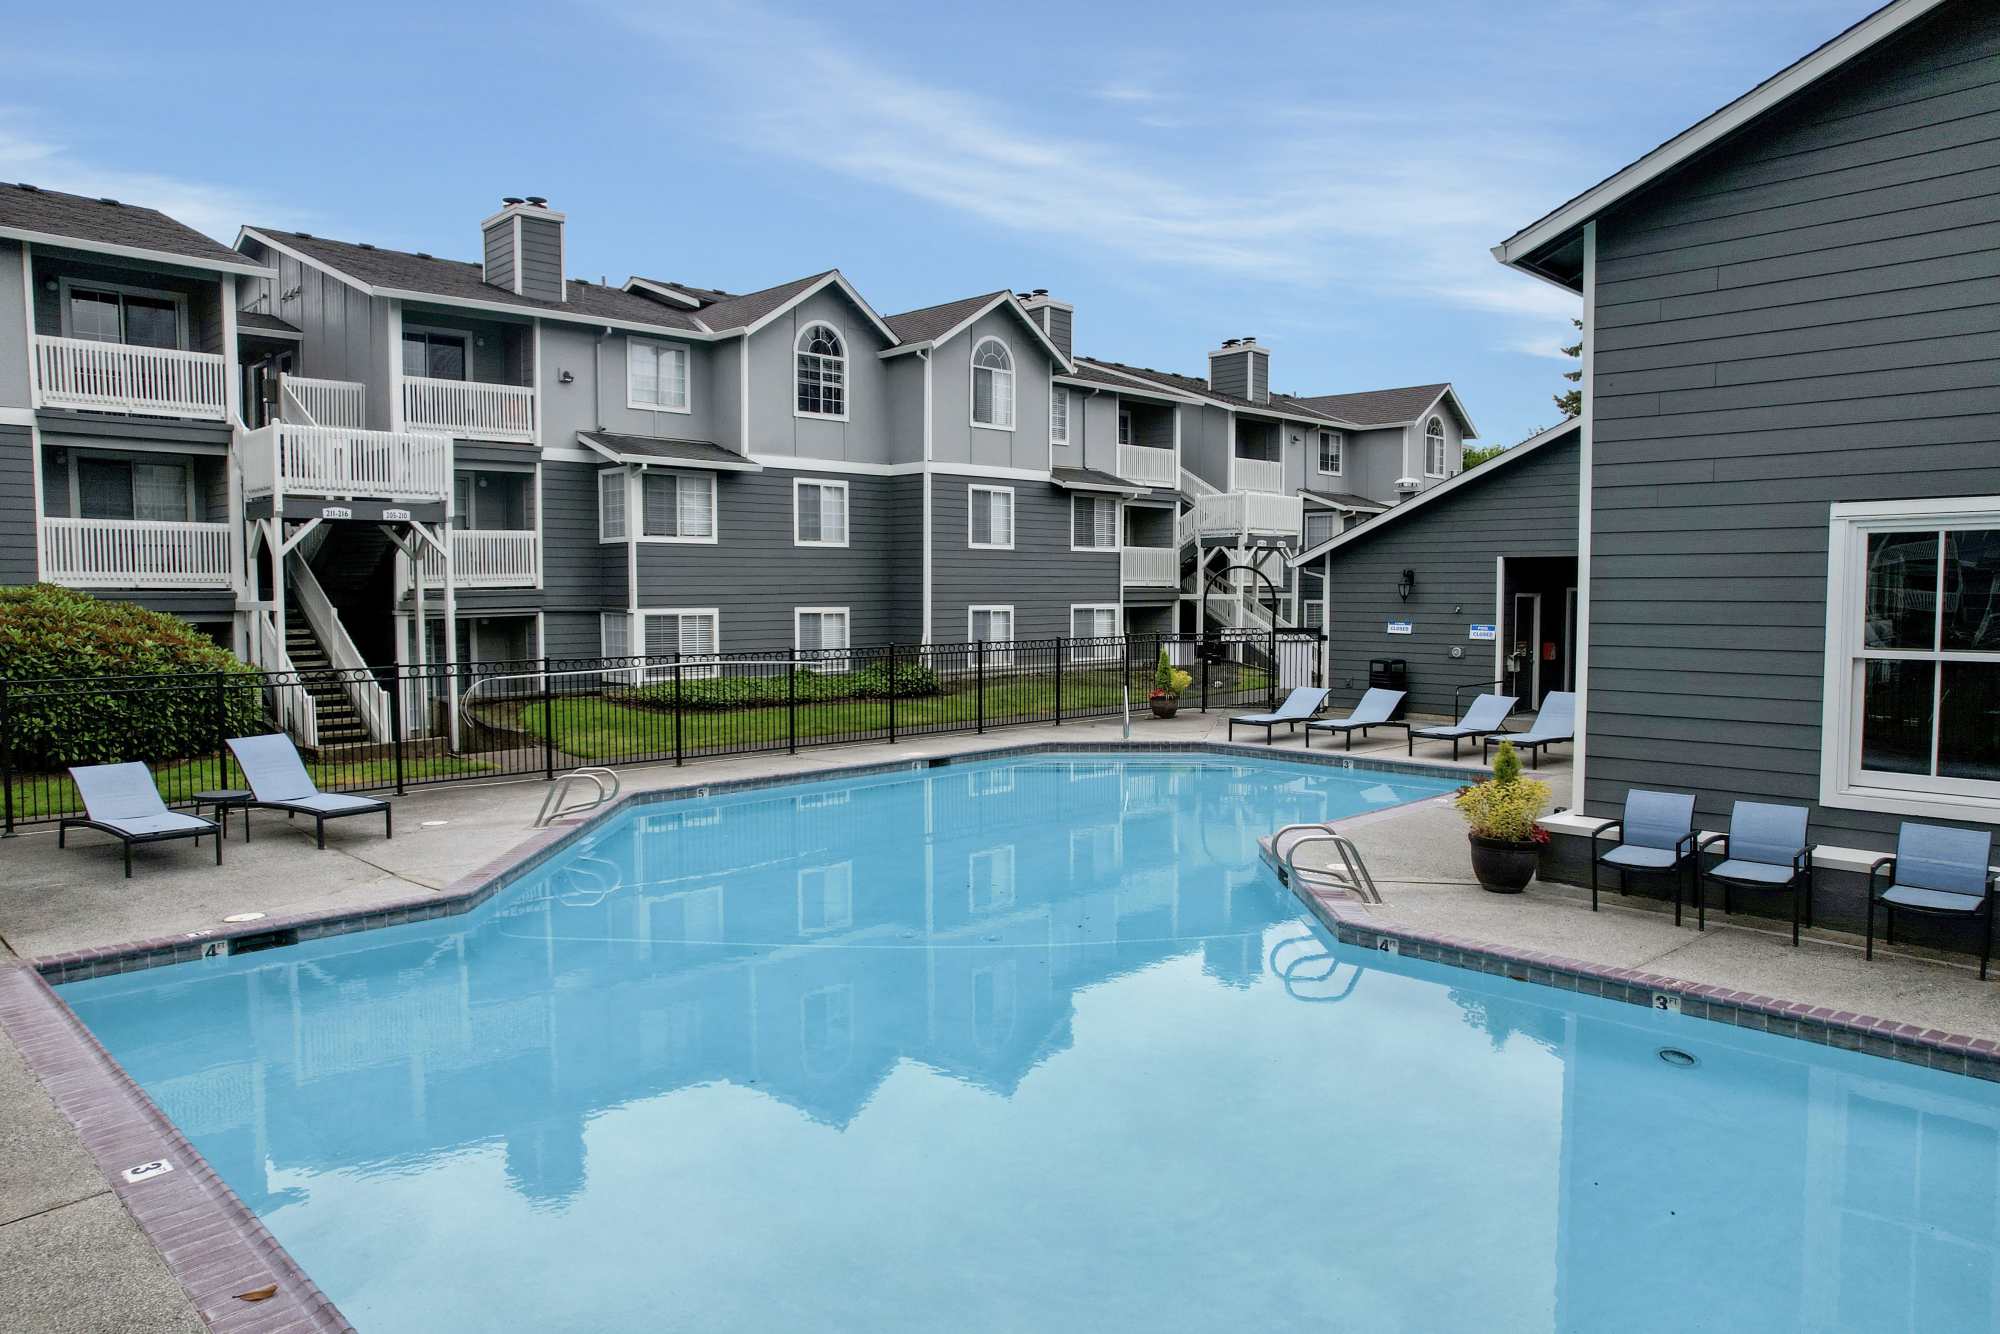 Sparkling pool with new lounge chairs at Walnut Grove Landing Apartments in Vancouver, Washington